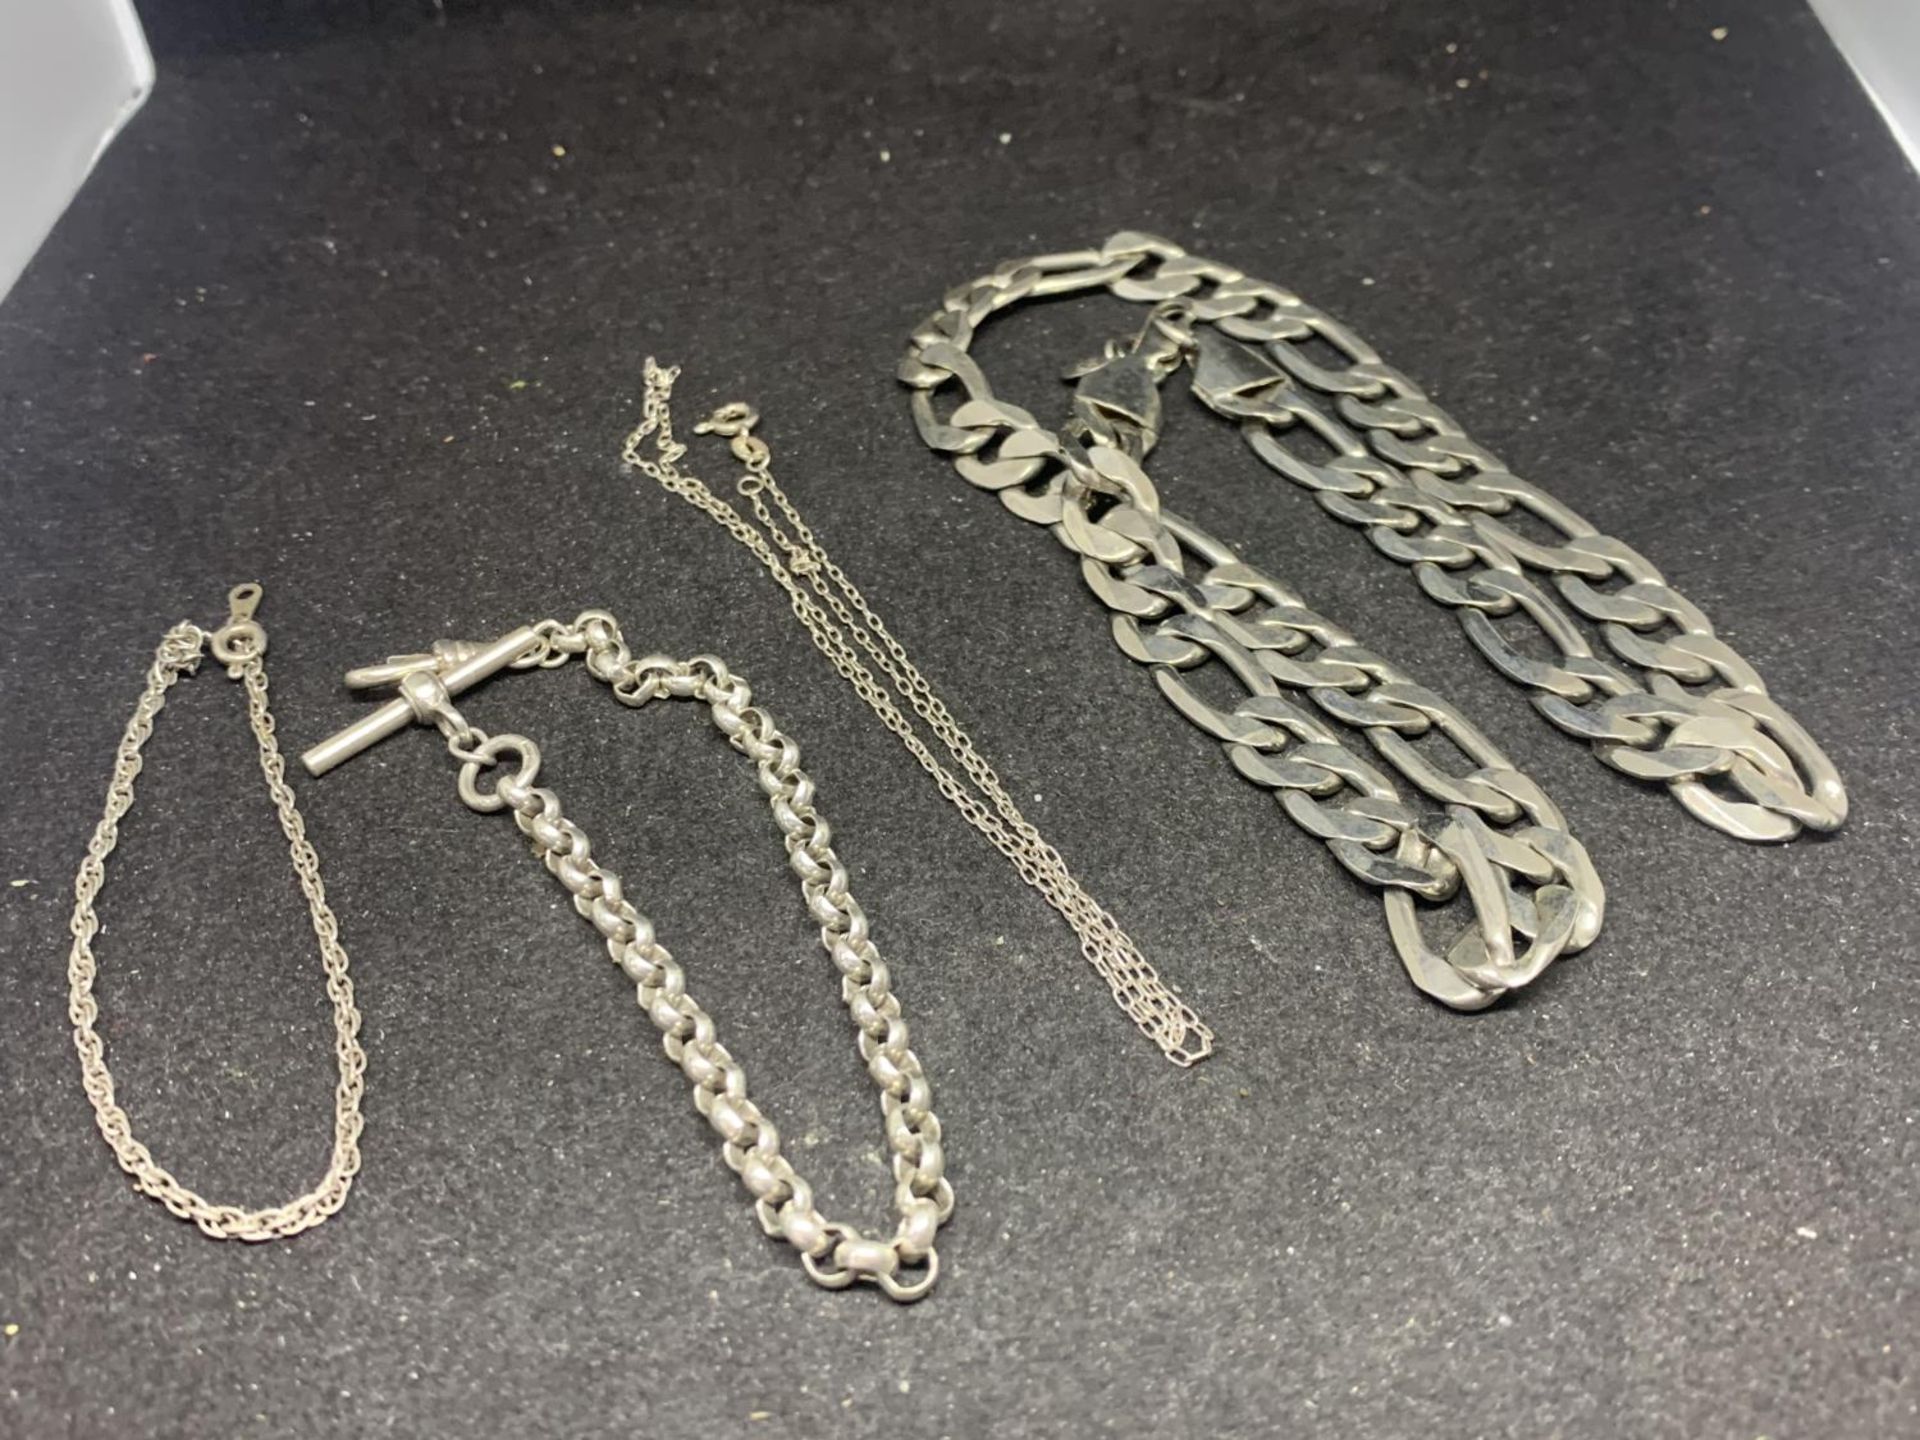 FOUR ITEMS OF SILVER JEWELLERY TO INCLUDE A HEAVY NECKLACE, FURTHER NECKLACE, A T BAR ALBERT CHAIN - Image 2 of 2